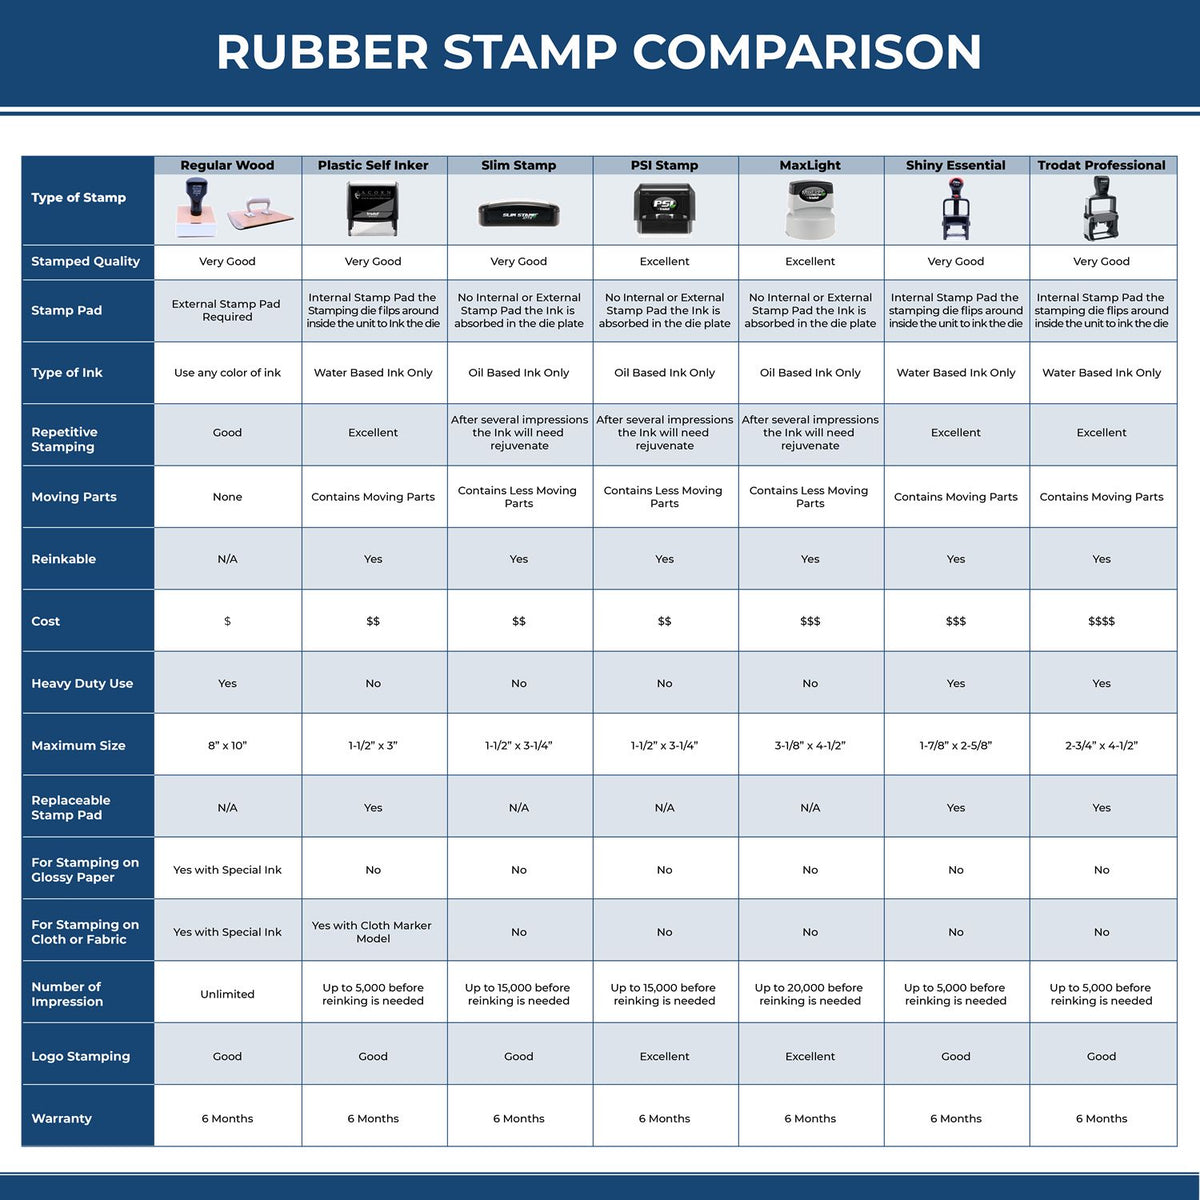 Large Self Inking Motion Stamp 4617S Rubber Stamp Comparison